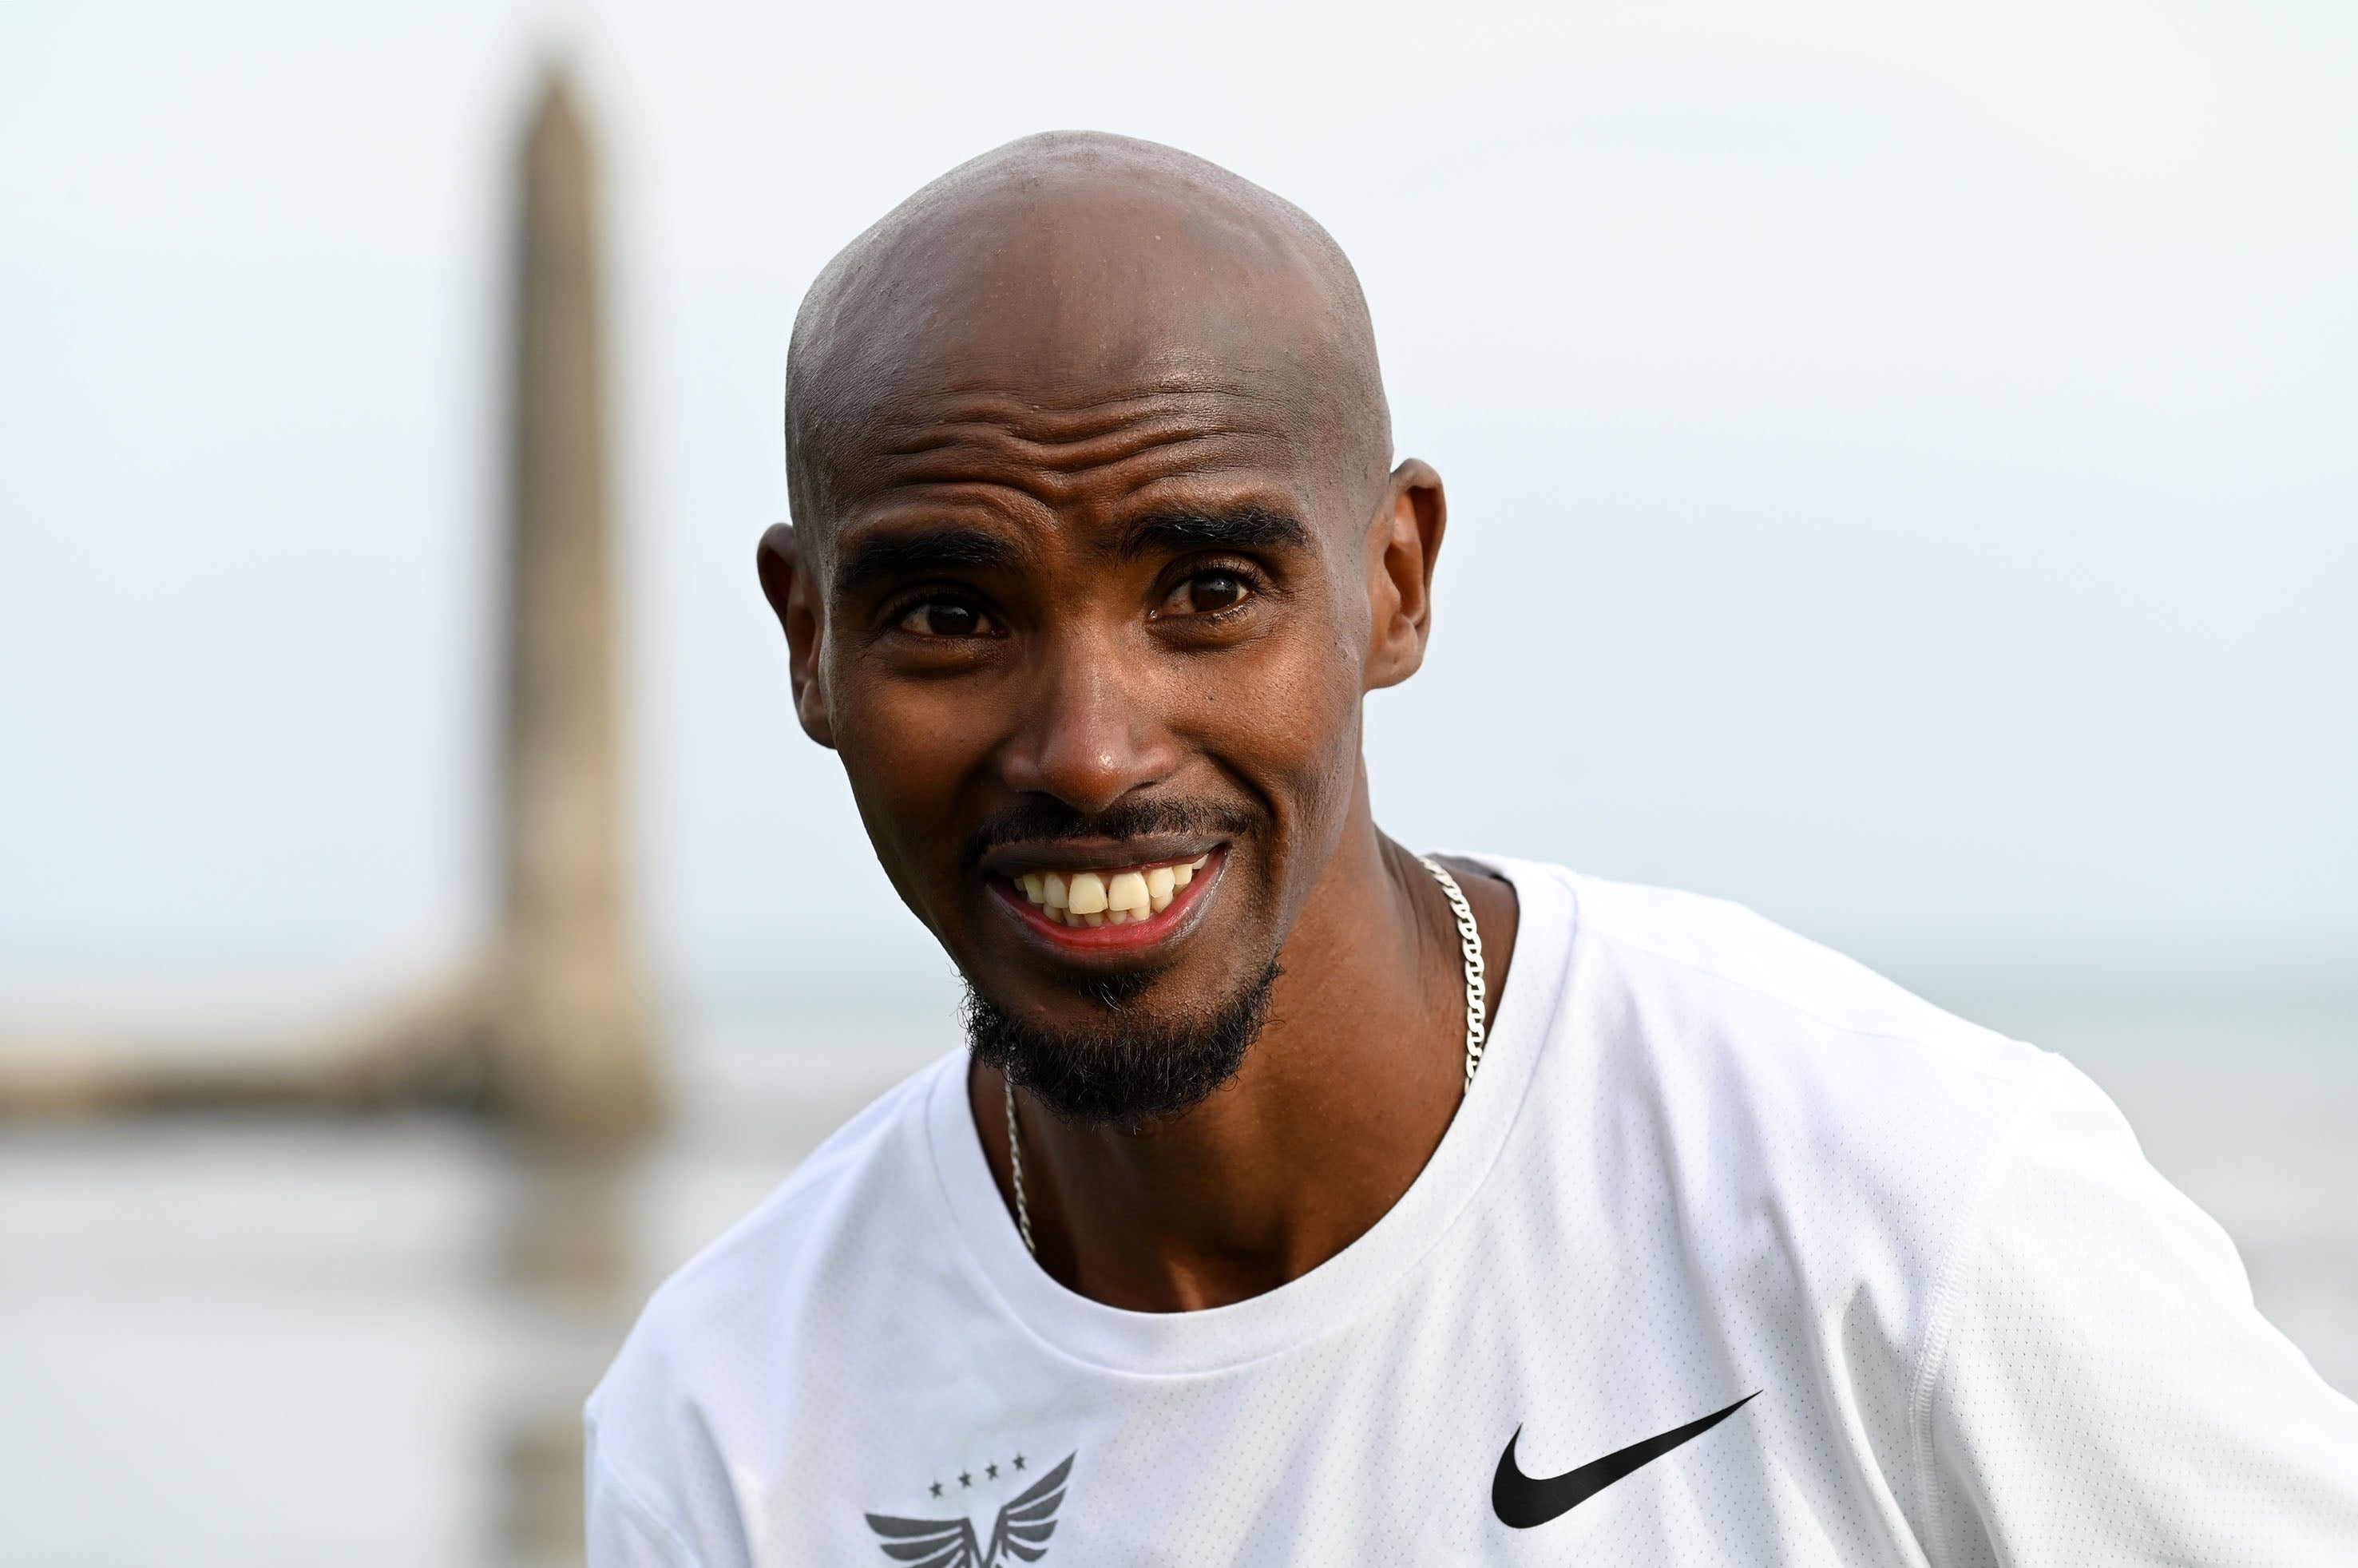 Calls to trafficking charity helpline up 20% after Sir Mo Farah documentary (Justin Kernoghan/PA)